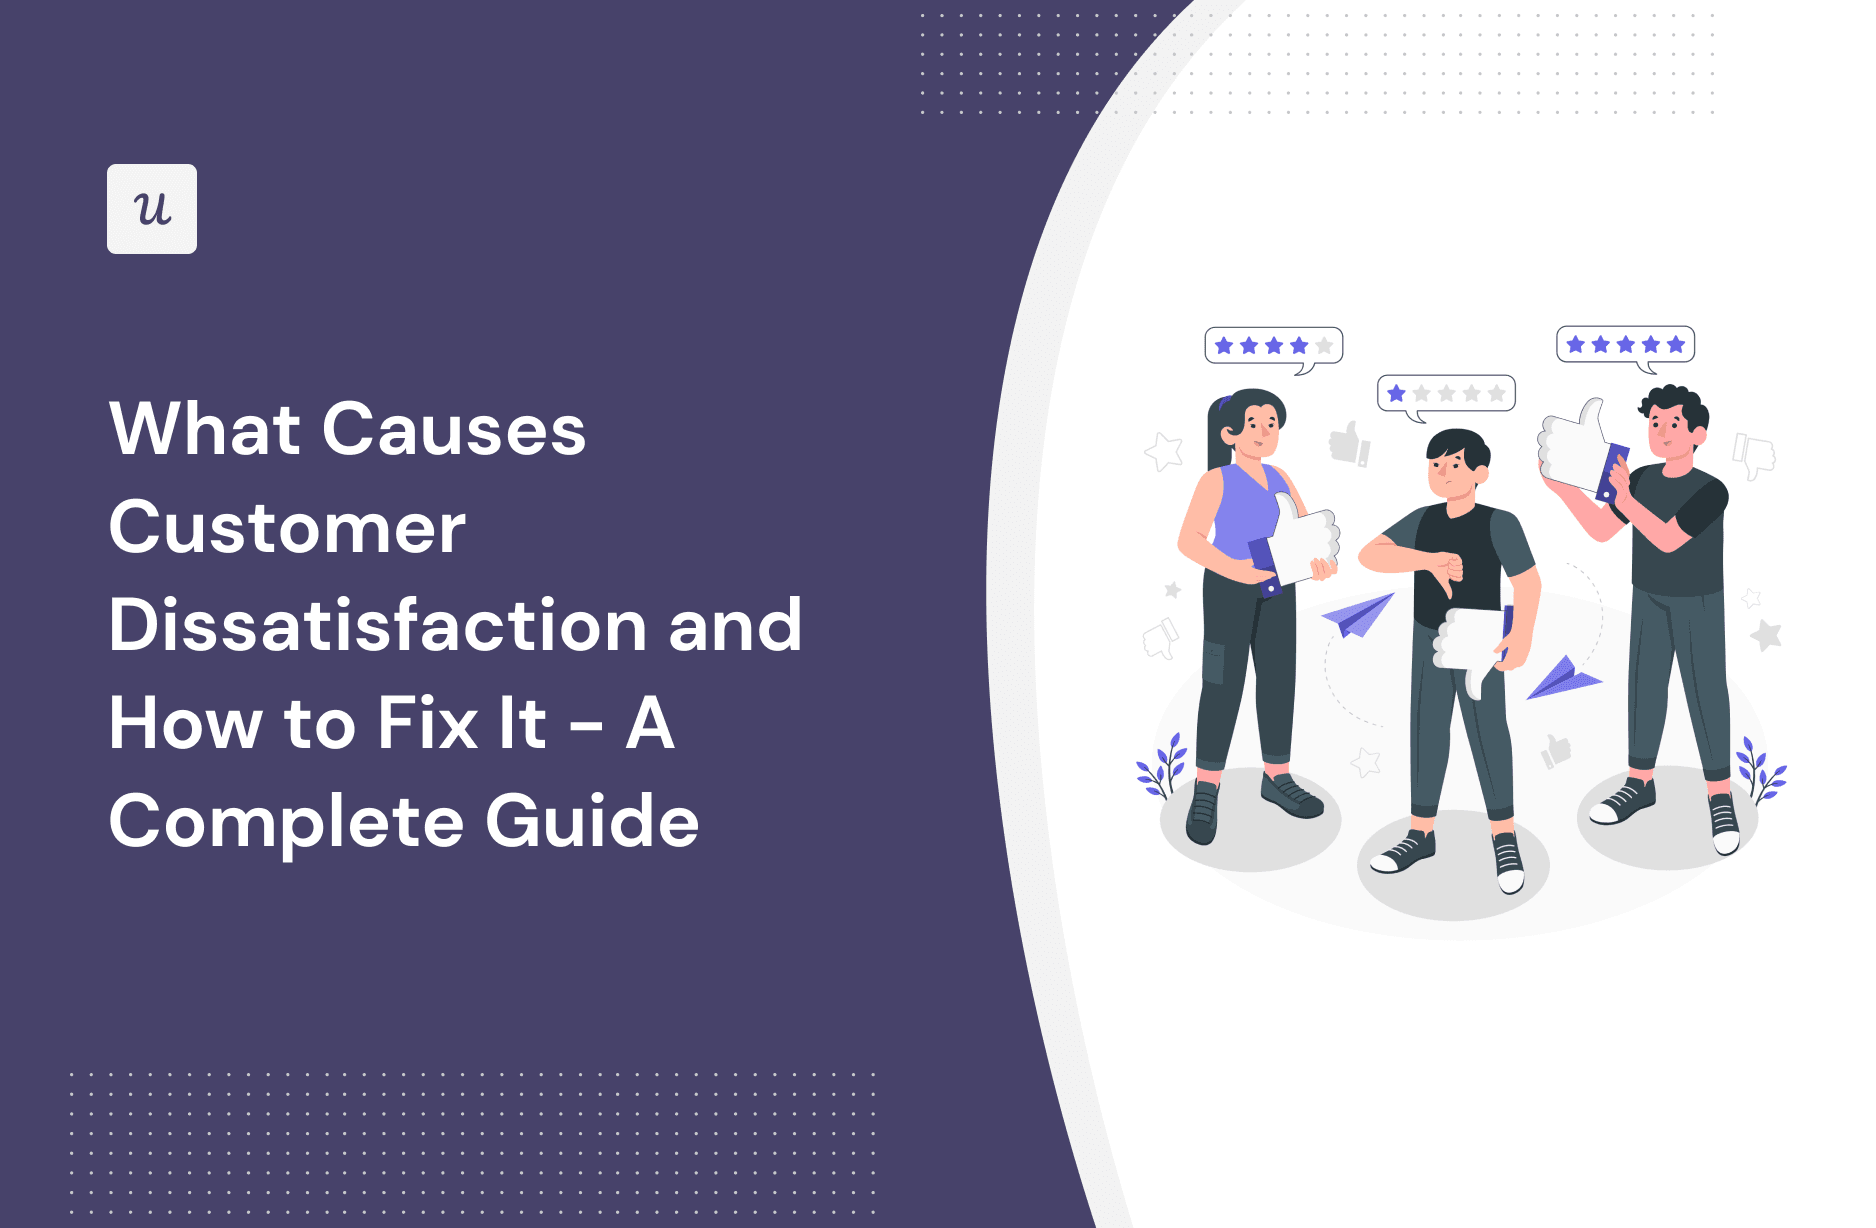 What Causes Customer Dissatisfaction and How to Fix It - A Complete Guide cover